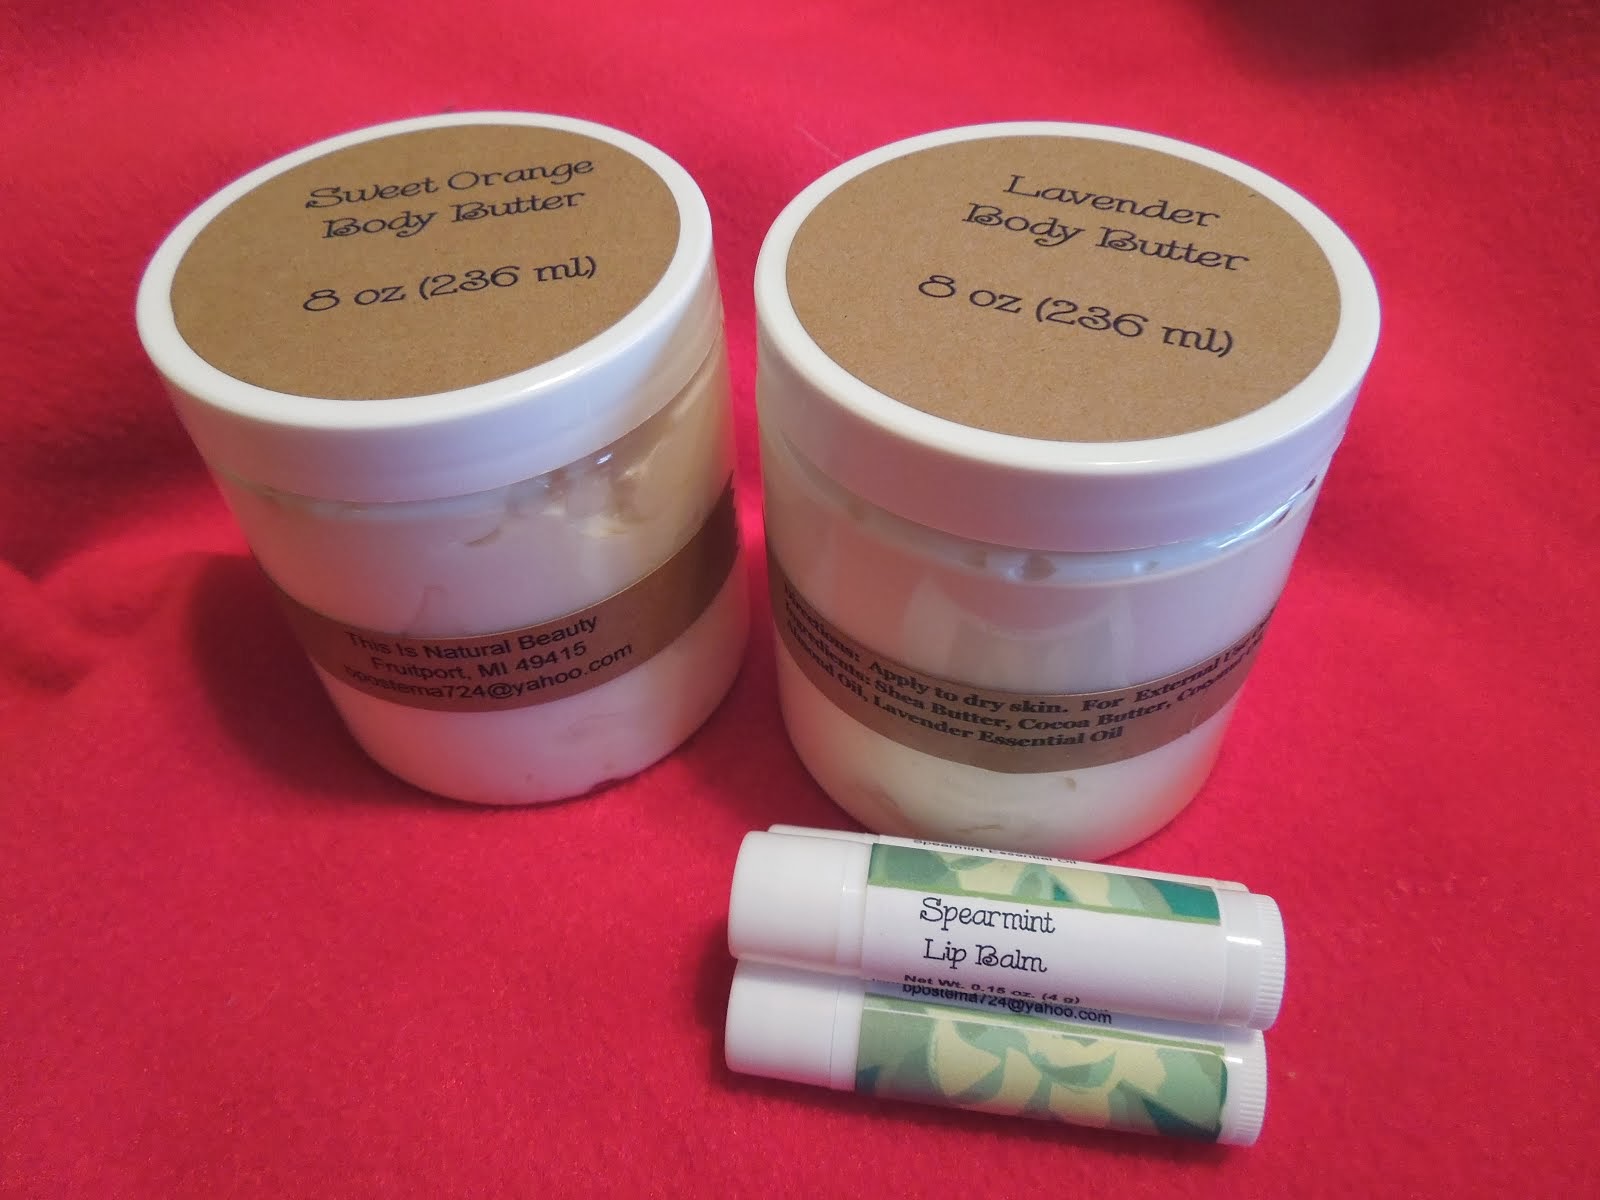 Body Butter and Lip Balm